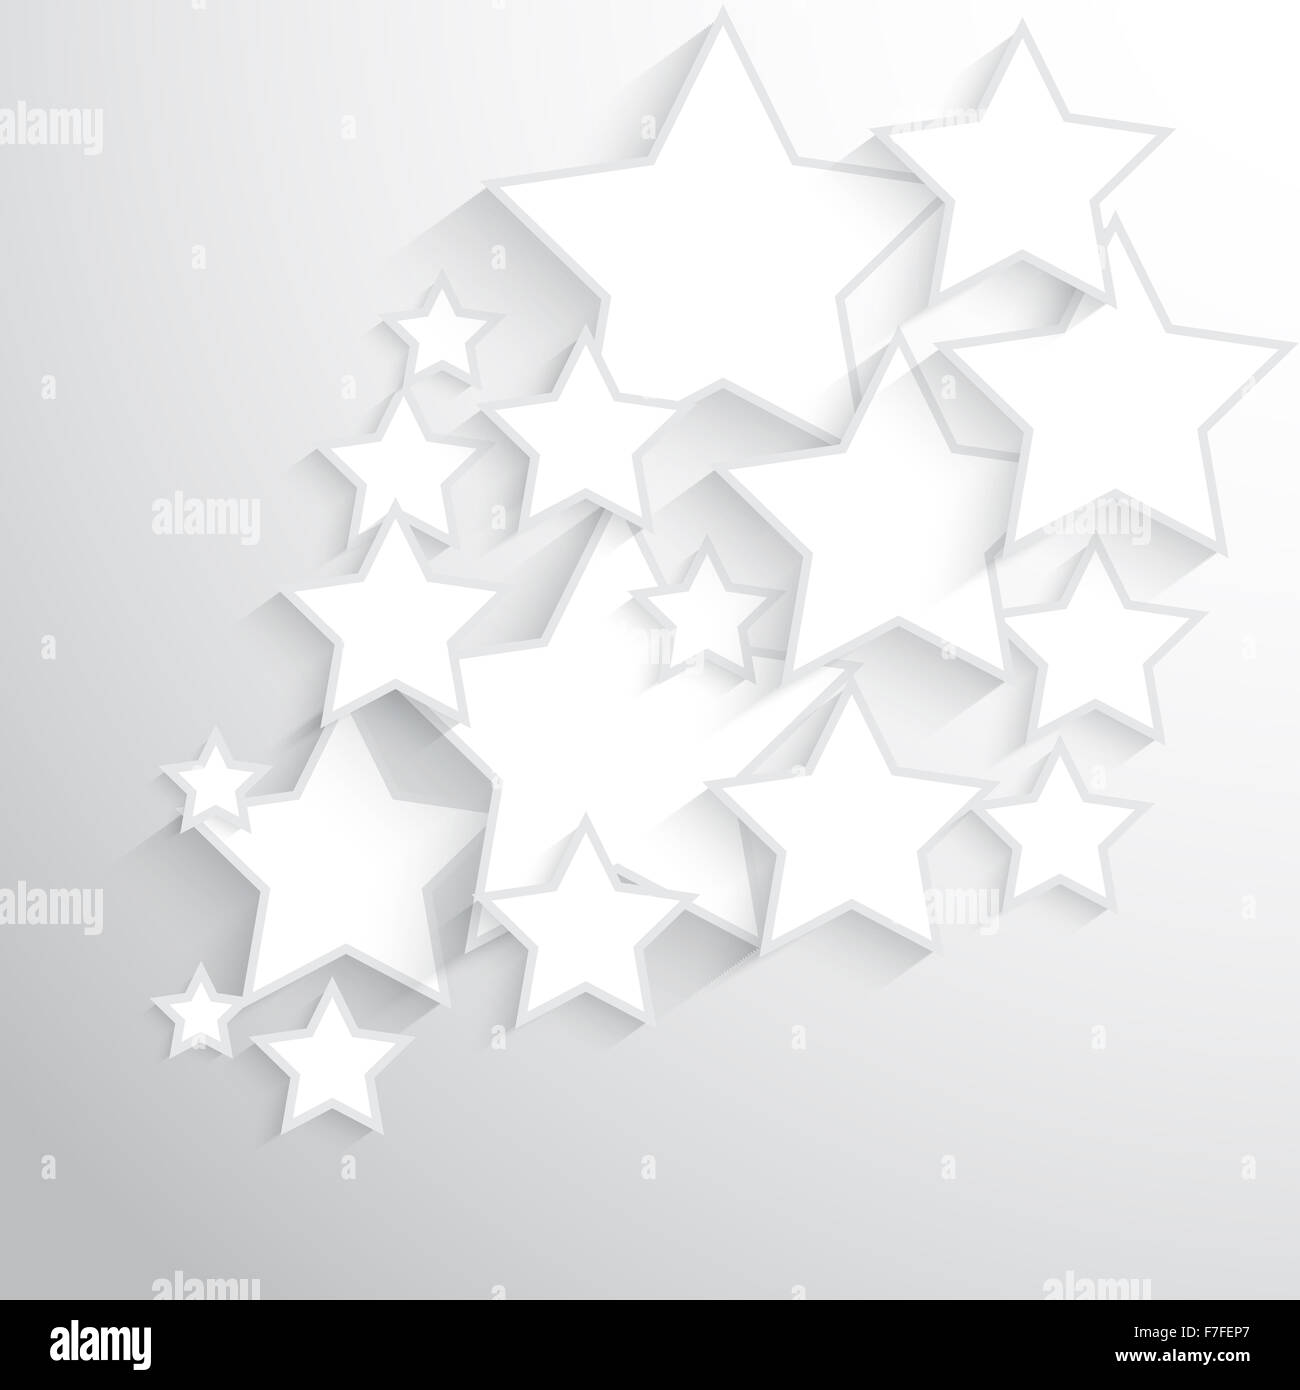 Background with 3D stars design Stock Photo